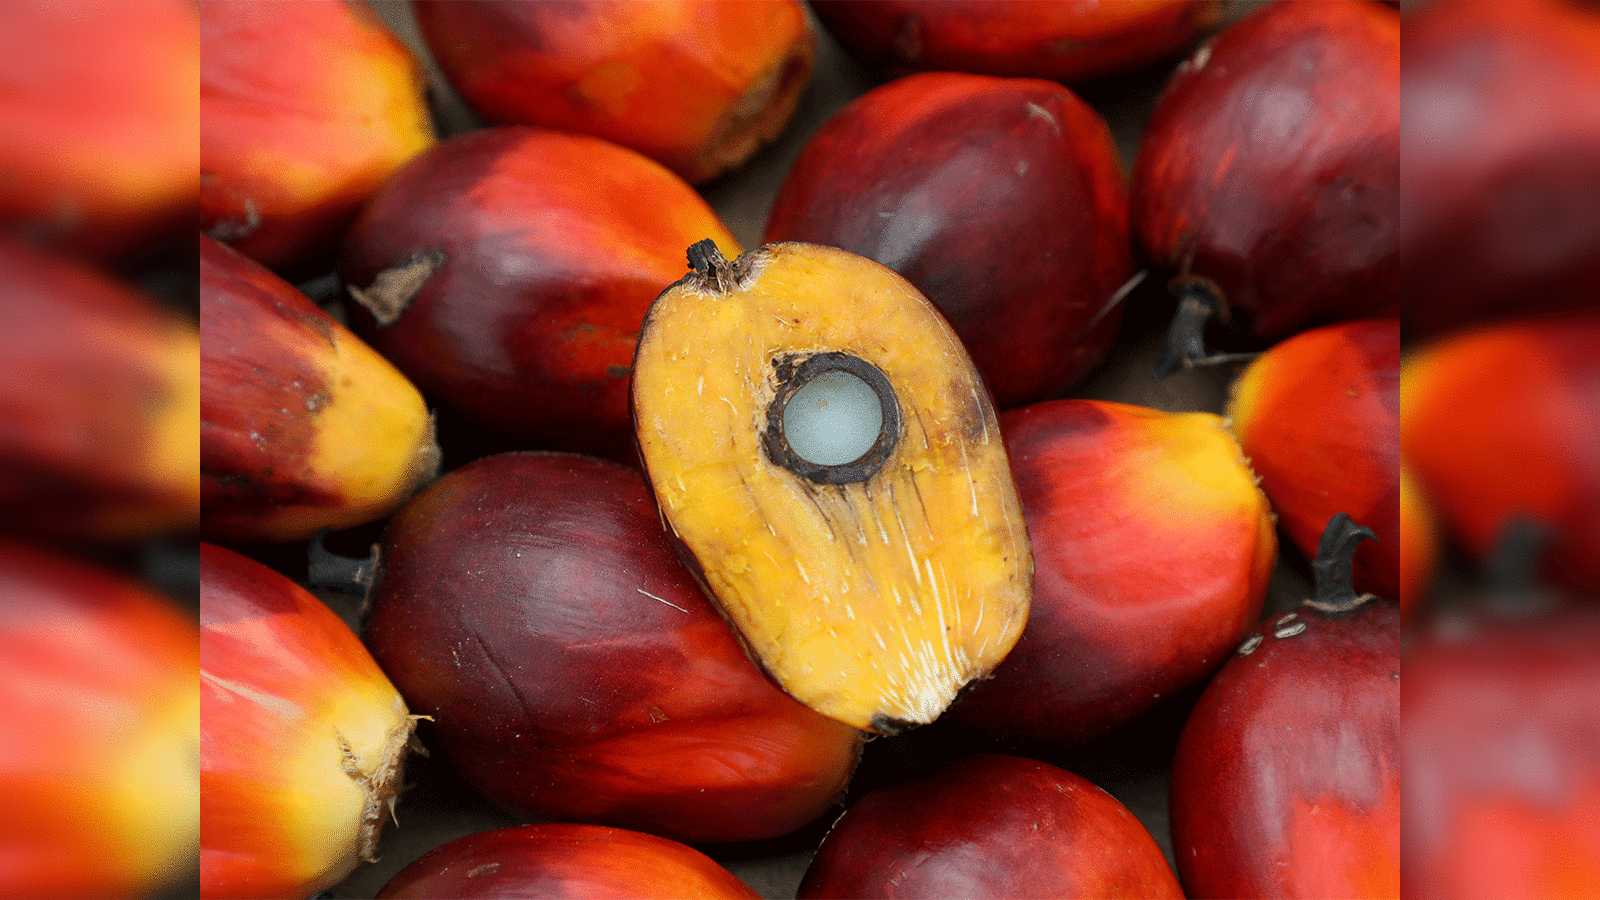 This Is How Palm Oil Is Made